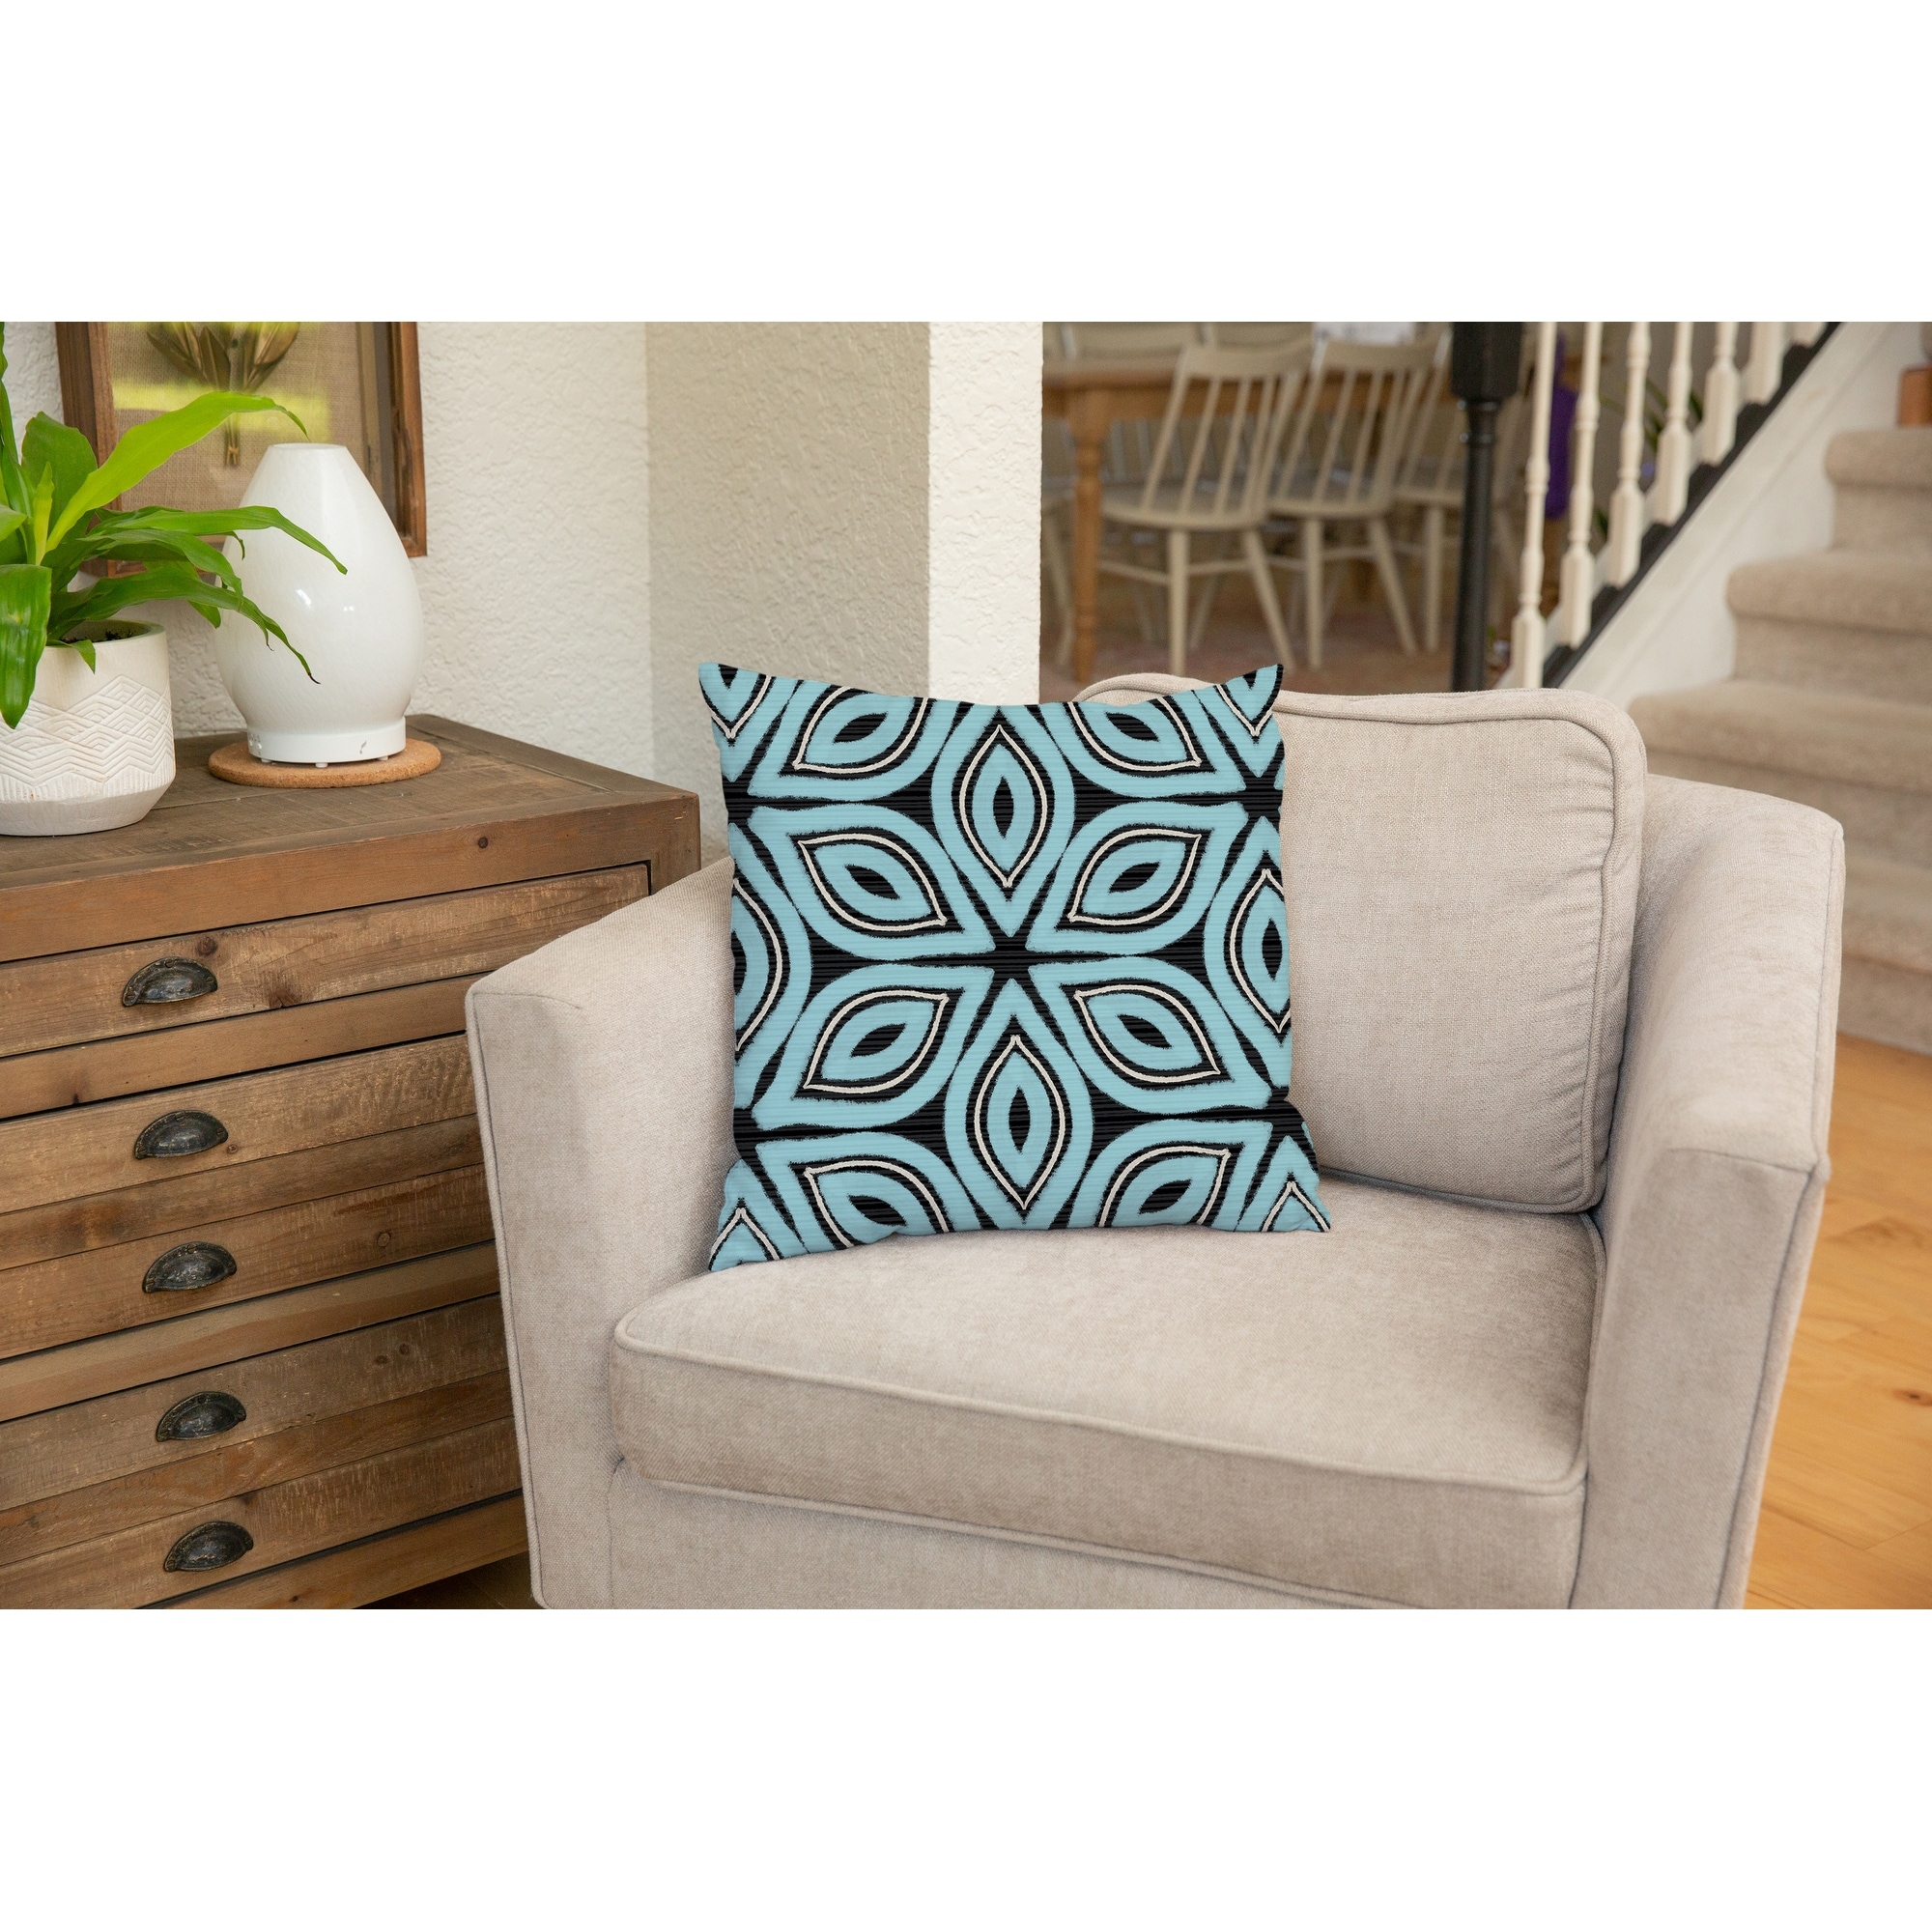 Luxury Teal Decorative Pillows